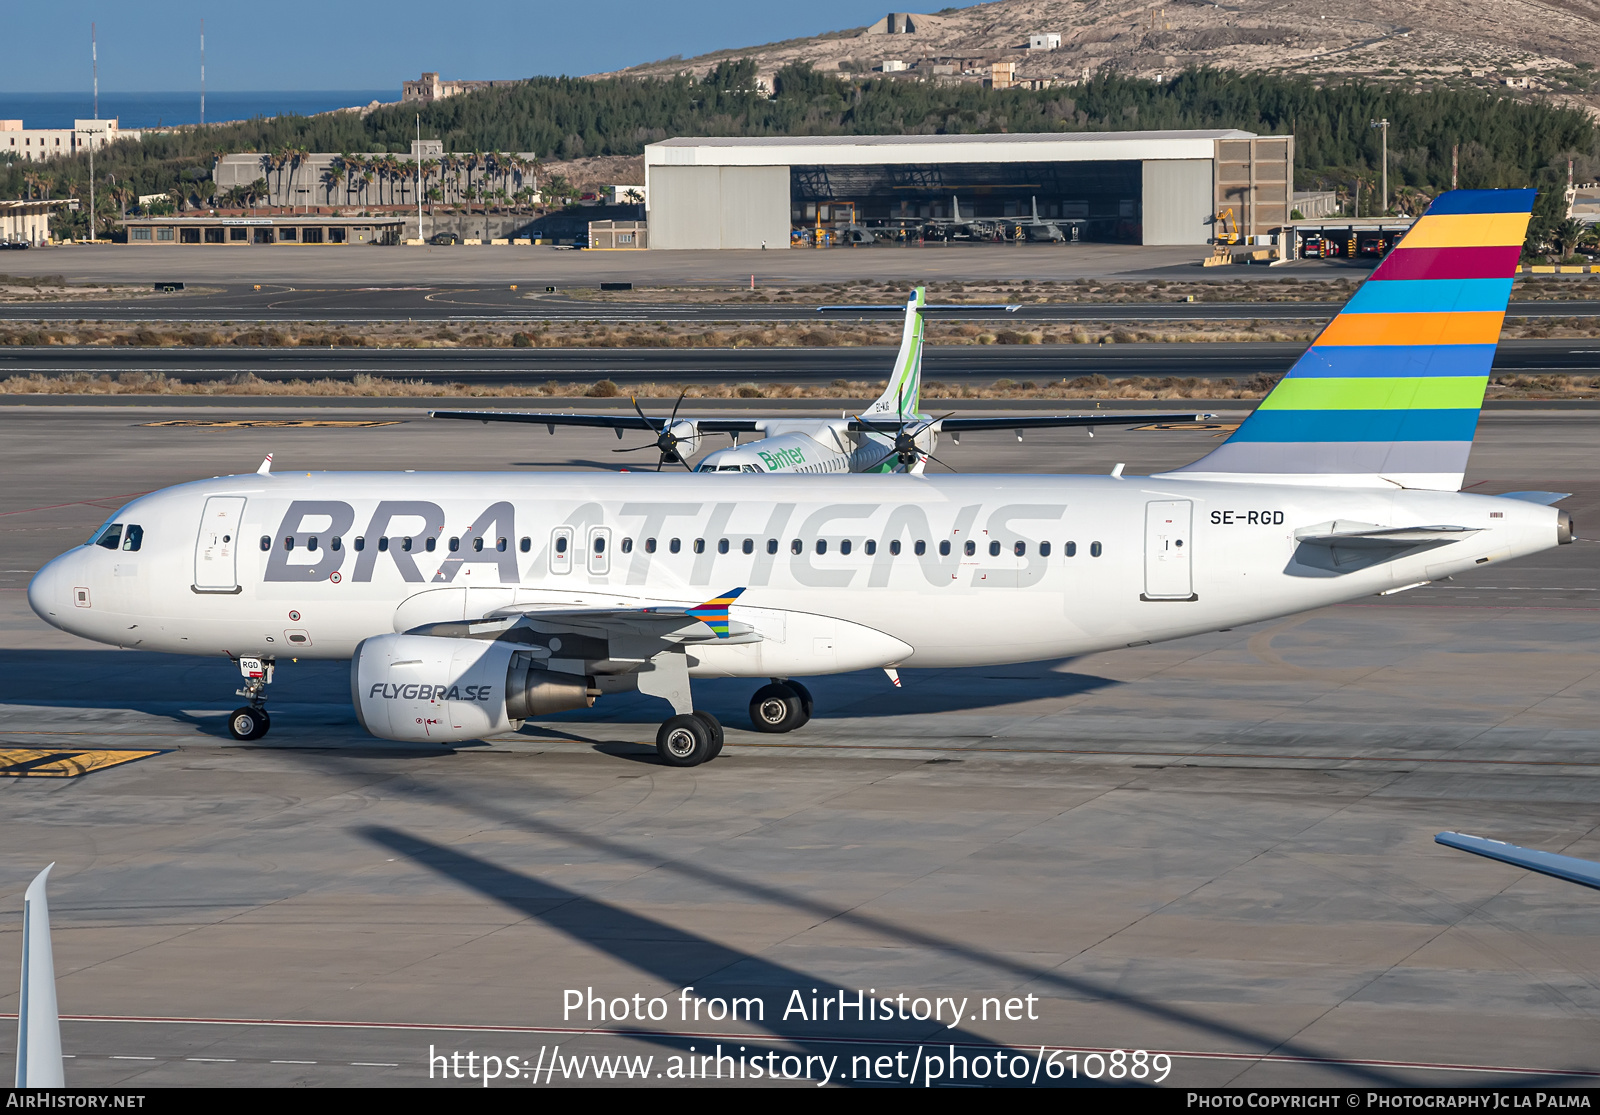 Aircraft Photo of SE-RGD, Airbus A319-112